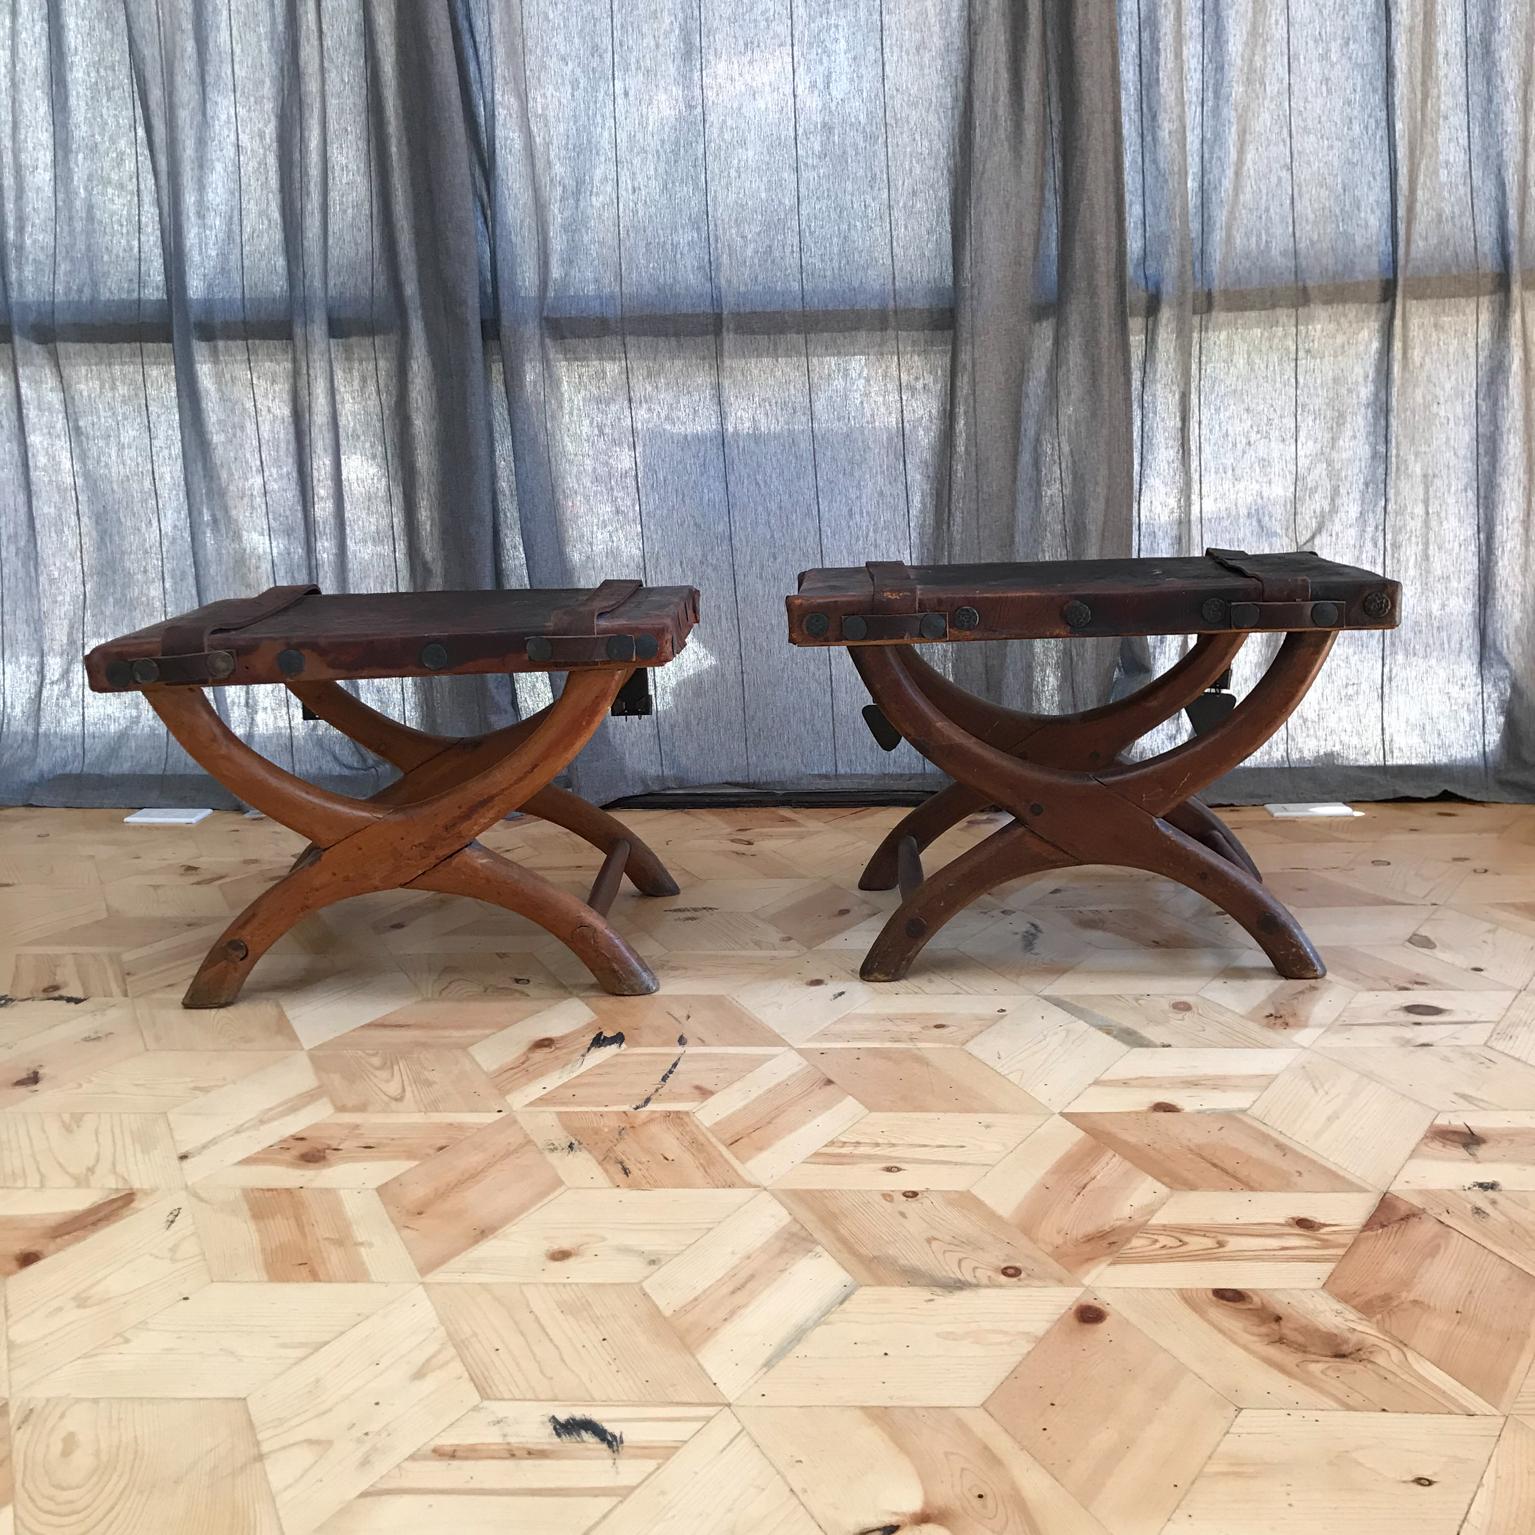 AMBIANIC presents: Vintage Spanish colonial curule stools ottoman bench, set of 2, circa 1940s. Made in Mexico.

Latin American style and manner of Clara Porset and Luis Barragan. Rustic leather seat with straps.

Features worn patina leather